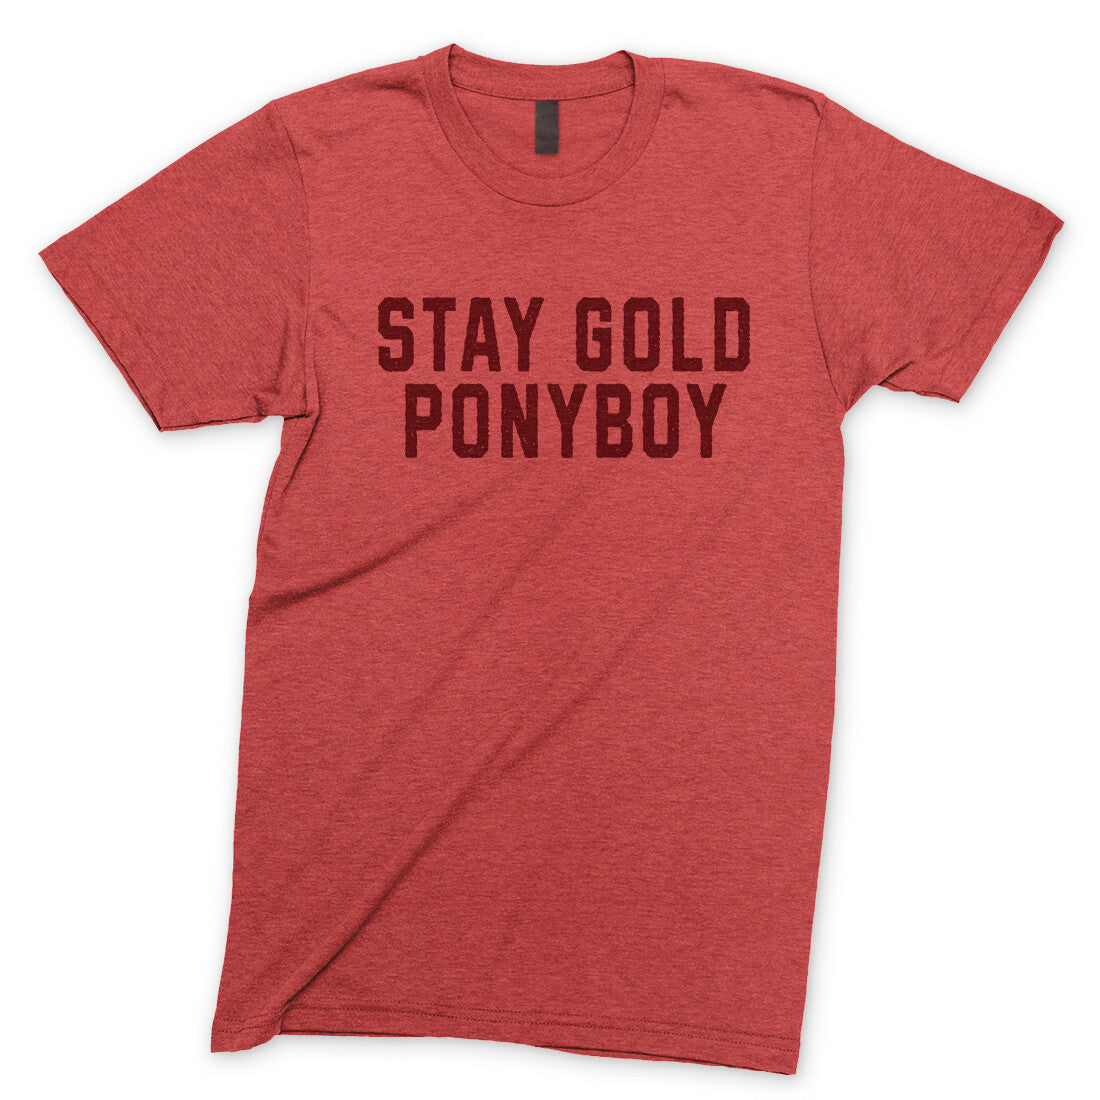 Stay Gold Ponyboy in Heather Red Color